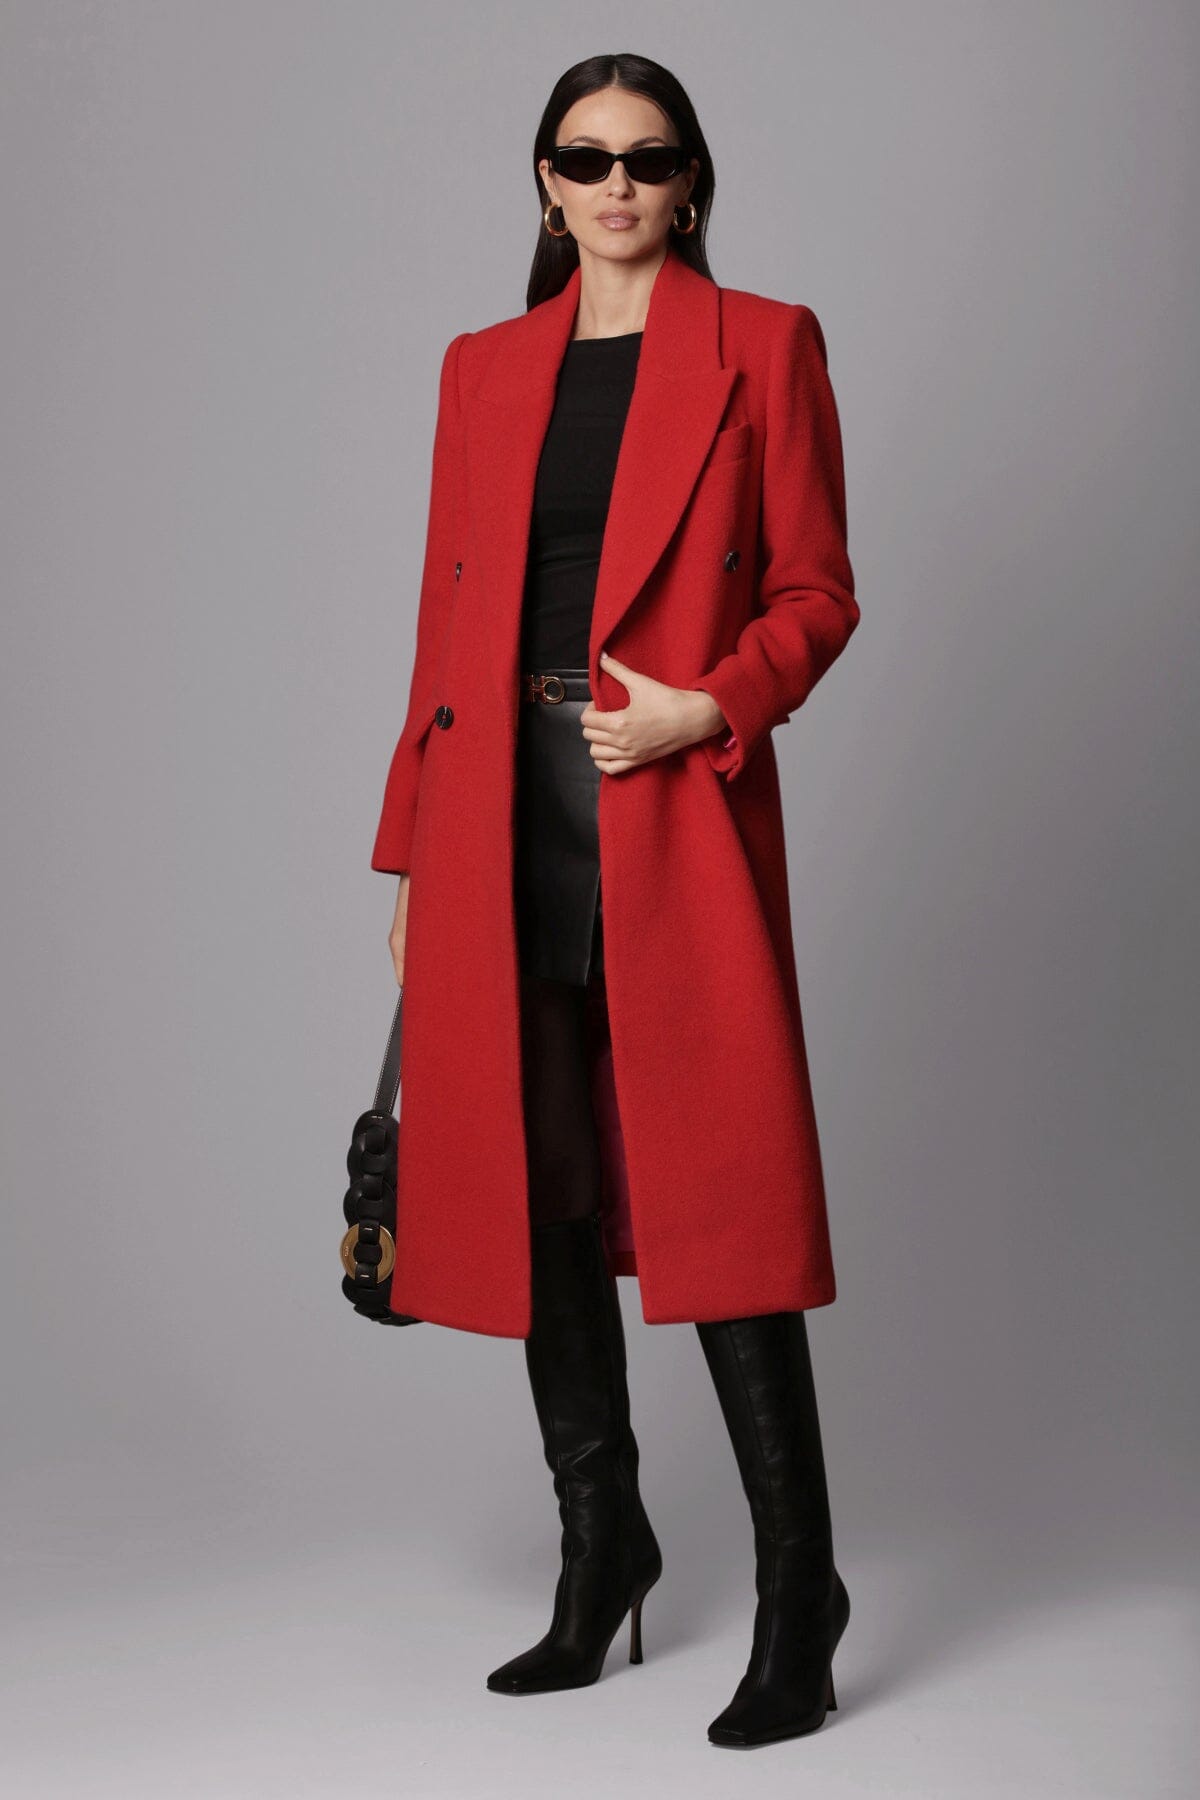 Crimson red wool blend double breasted tailored coat jacket - women's figure flattering office to date night coats jackets for fall